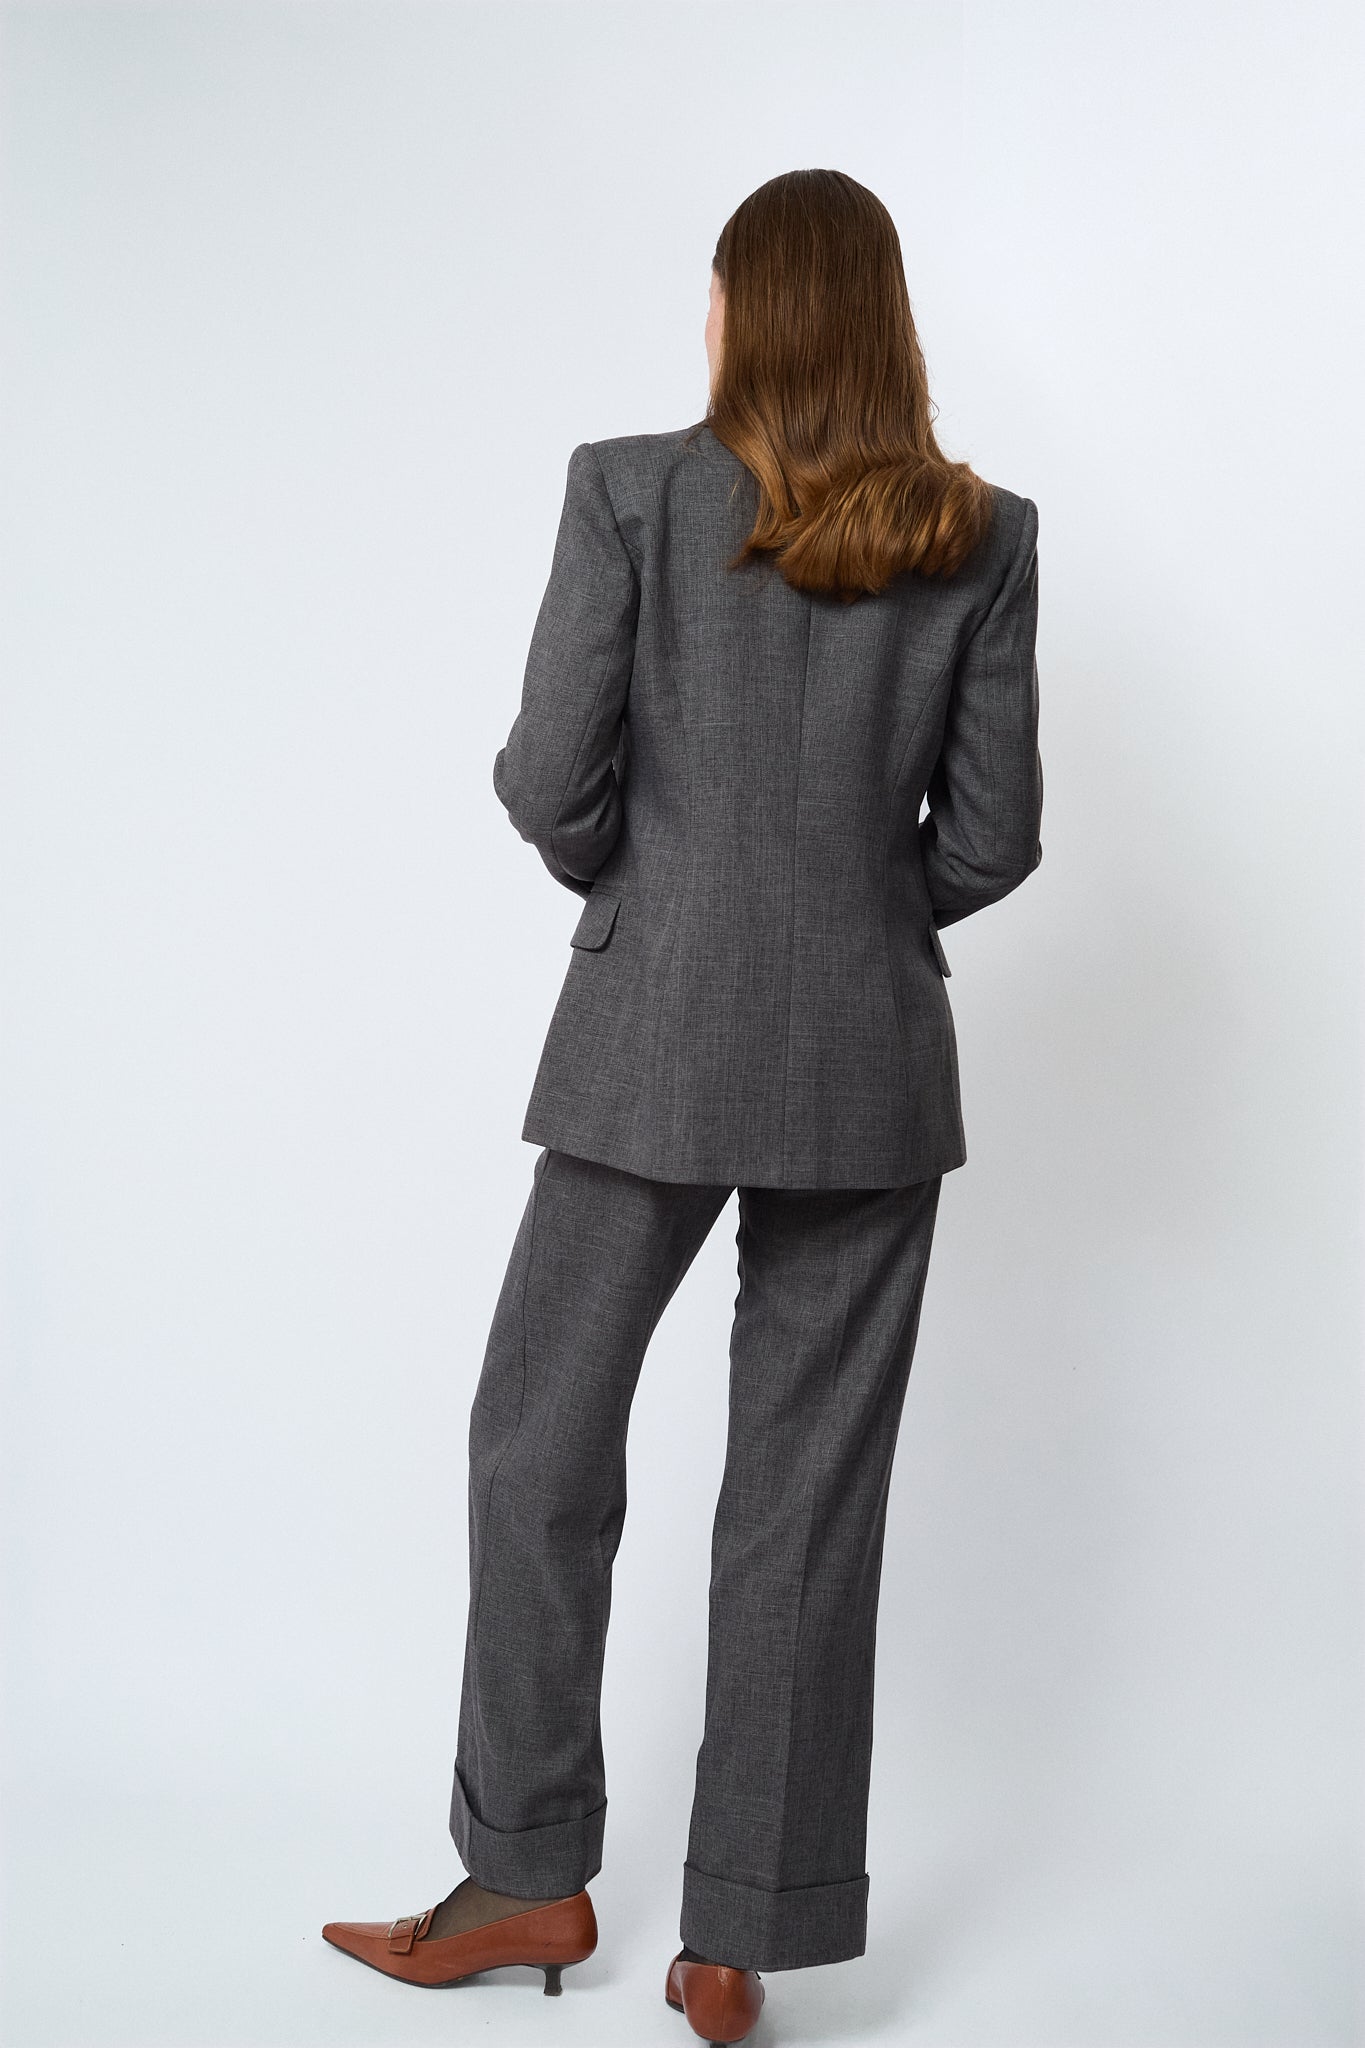 Fitted business suit